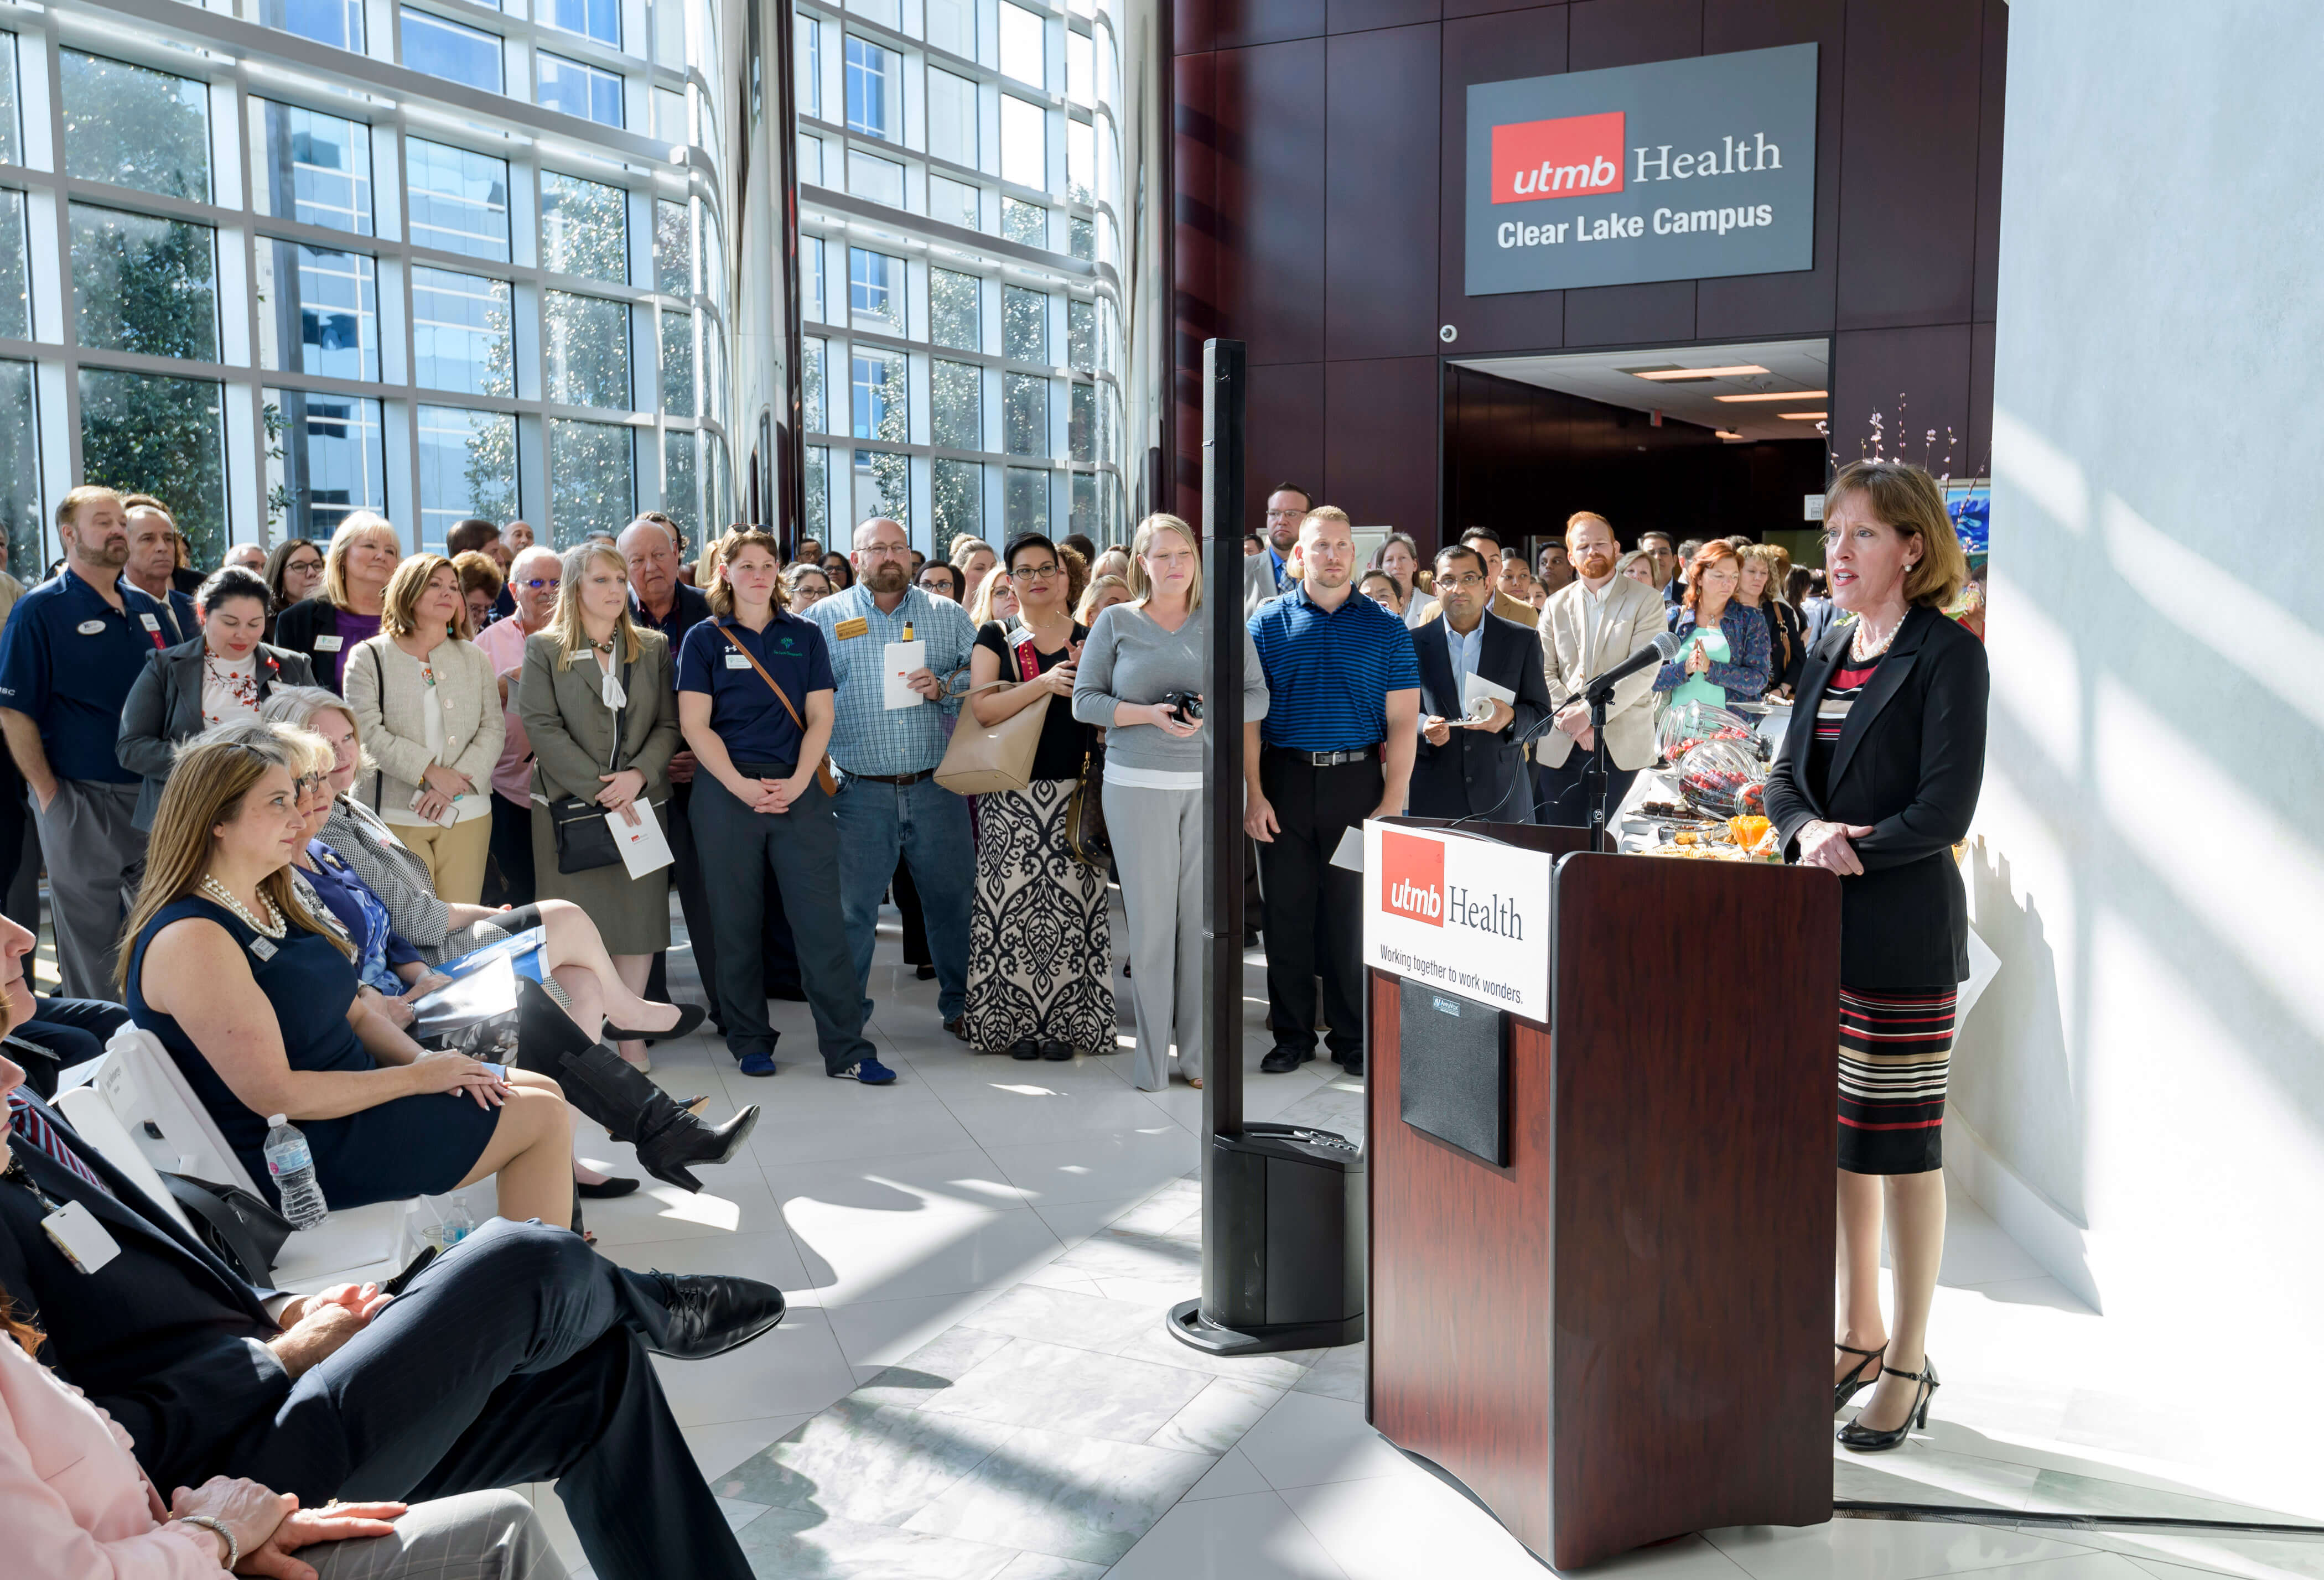 Amy Shaw Thomas, executive vice chancellor for Health Affairs ad interim of The University of Texas System speaks at the UTMB Health Clear Lake Campus in Webster, Texas, during the grand opening celebration on March 20, 2019.